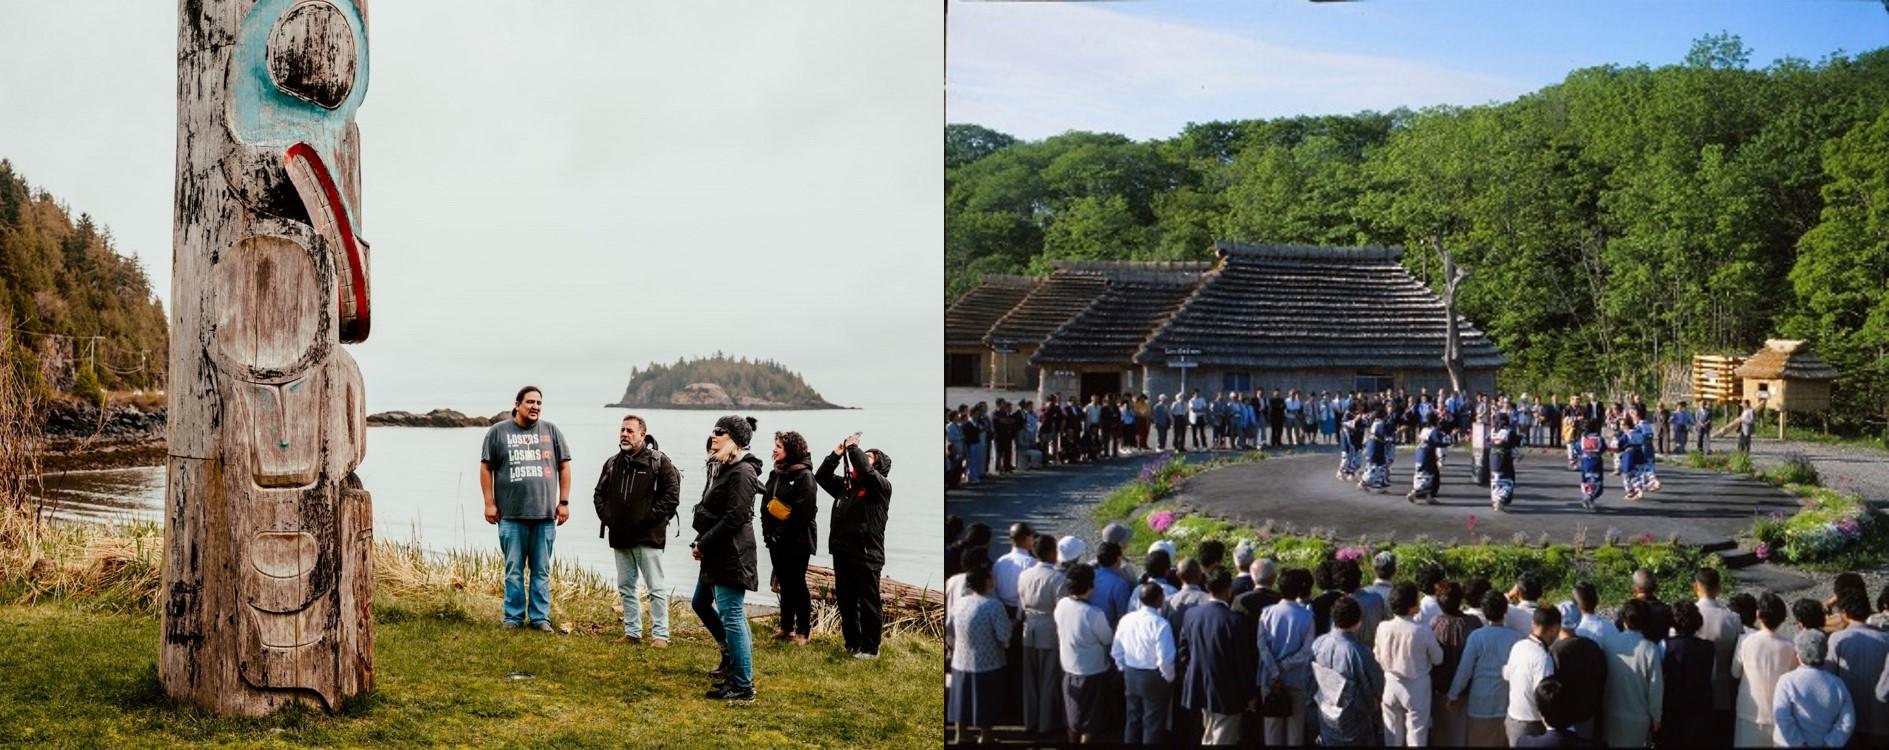 left: a crowd gathers beneath a totem; right: a crowd gathers for a symposium event